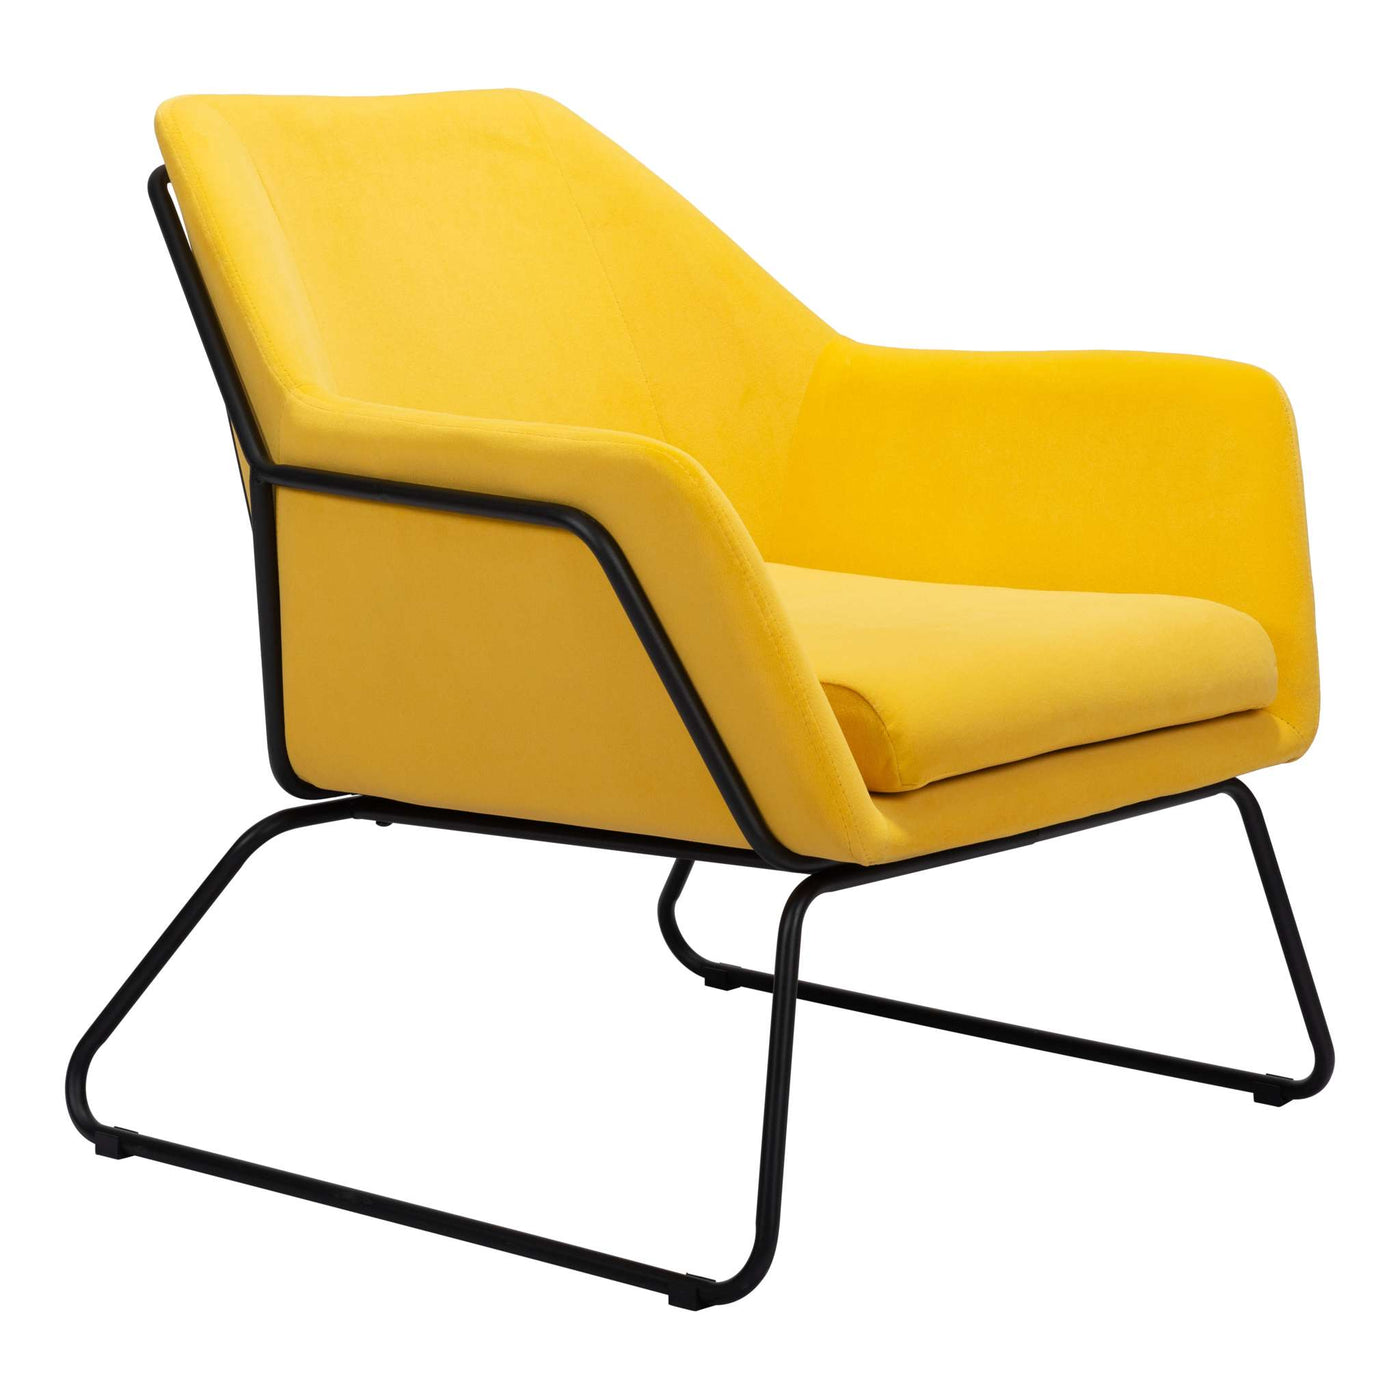 Zuo Mod Jose Accent Chair